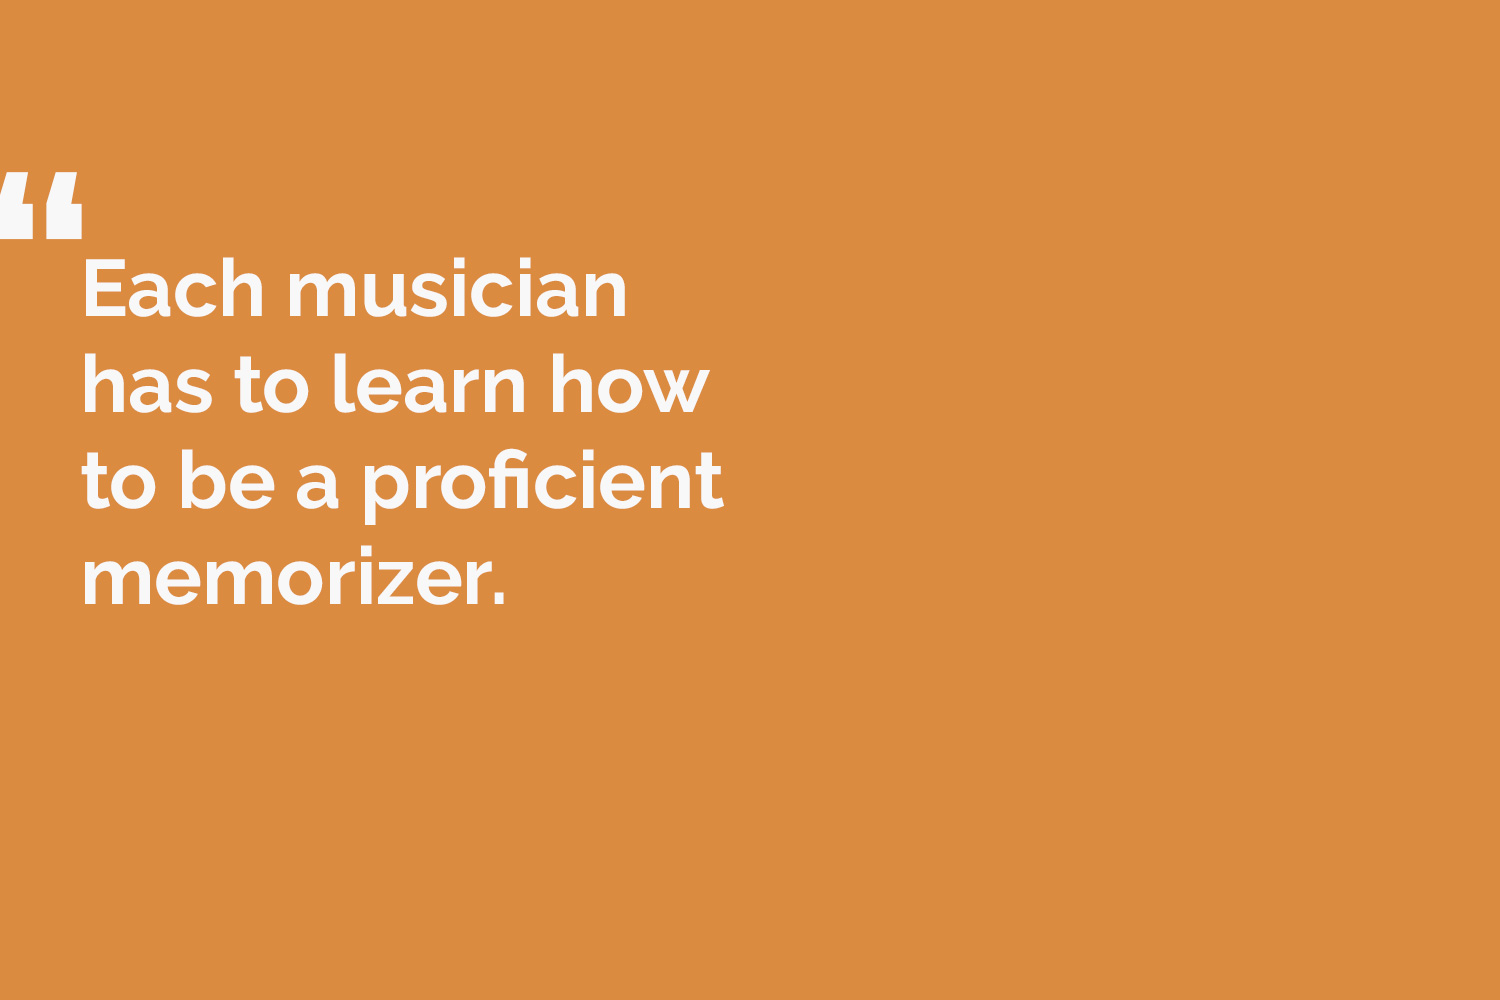 quote card reads: Each musician has to learn how to be a proficient memorizer.